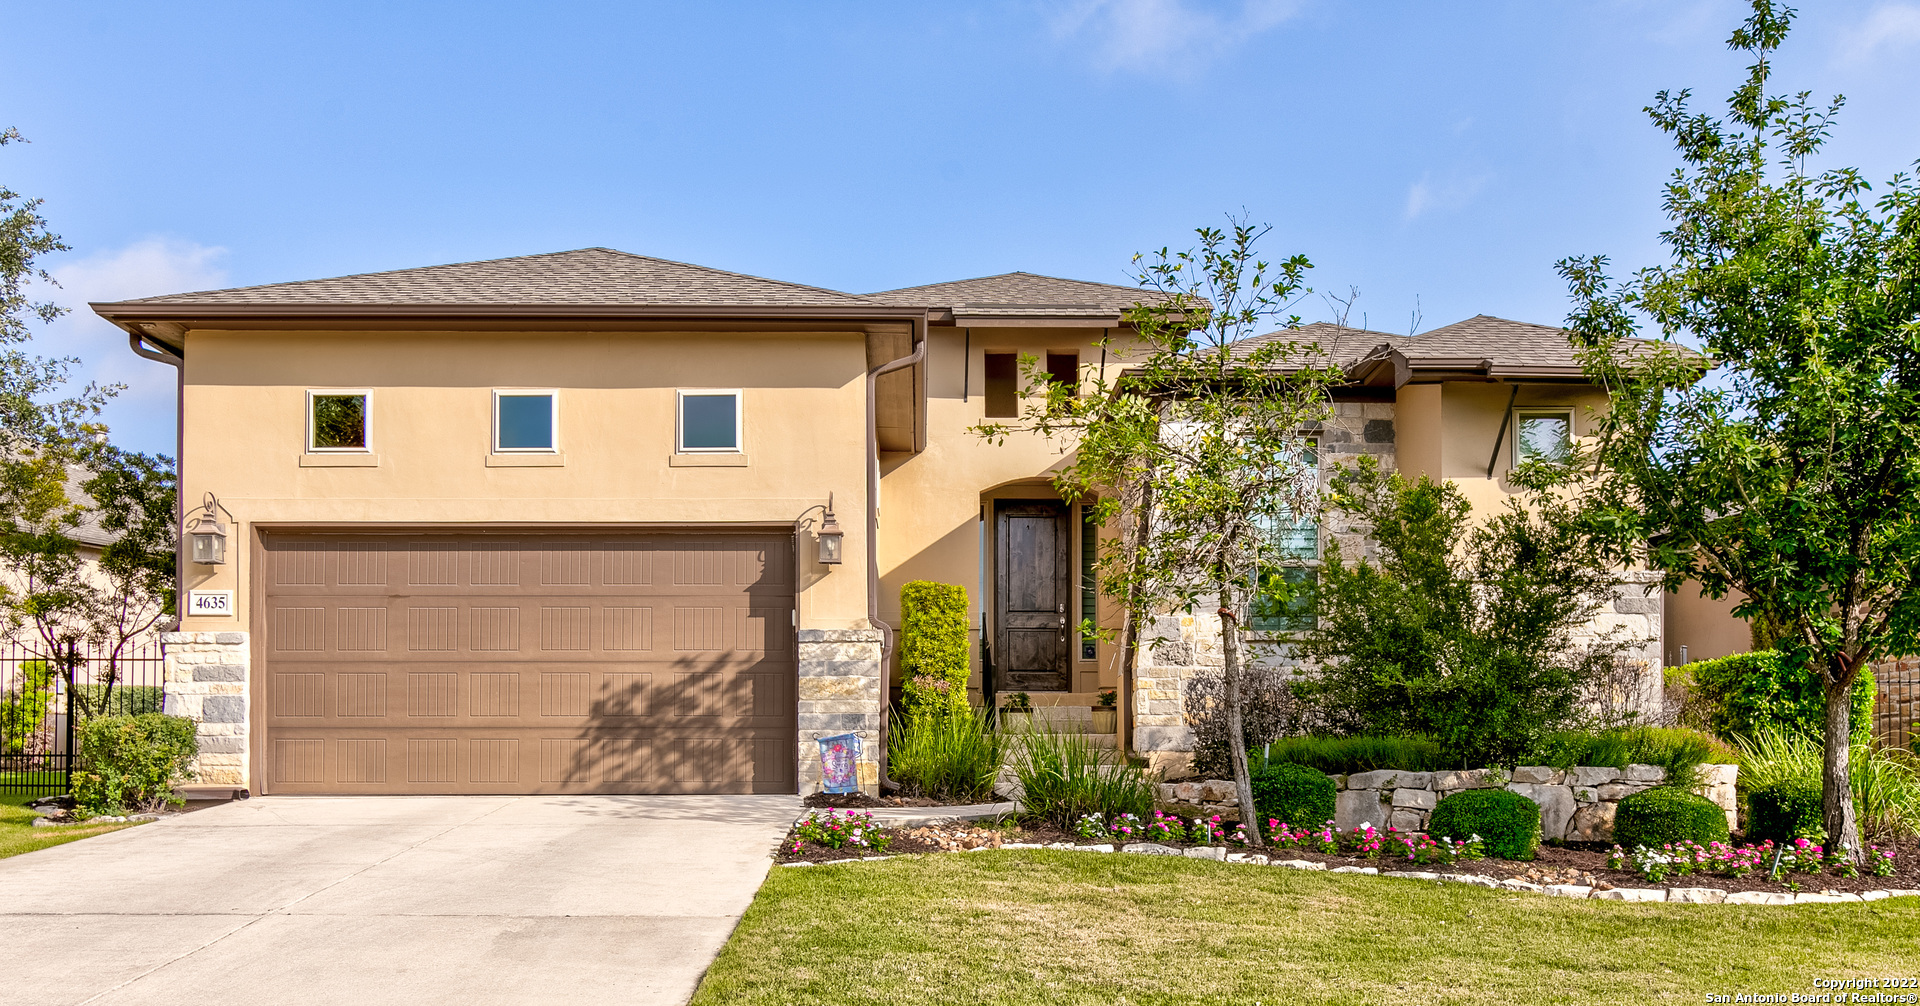 Beautiful inside and out! This home is located in the Prestigious Cibolo Canyons Neighborhood. This pristine home offers 2 bedrooms 2 full bathrooms, 2059 sqft. Thoughtfully landscaped grounds invite you into the front yard.   You are warmly greeted by the beautiful study -office at the entry. The home features an open floor plan with high ceilings neutral tones and decorative lighting through the dining and living room that connects to the gourmet kitchen with an eat-in area island bar, plenty of cabinetry for storage, and granite countertops, gas cooking, microwave, dishwasher, and walk-in pantry. The serene primary suite has a view of the trees and the beautiful backyard, an en-suite bath with tub, separate shower, walk-in closet, and double vanity.  Other distinguishing features include ADA complaint doorways, storage closets, a California closet system, a new water softener, heat plunge pool.  You will enjoy relaxing on the back patio with a pool with a waterfall that overlooks the beautiful backyard with a wrought iron fence and a view of the mature trees. Enjoy the incredible neighborhood resort-style living with an amenity center, 3 pools, gym, yoga studio, outdoor kitchen area, and fire pit. Come and make it your own!